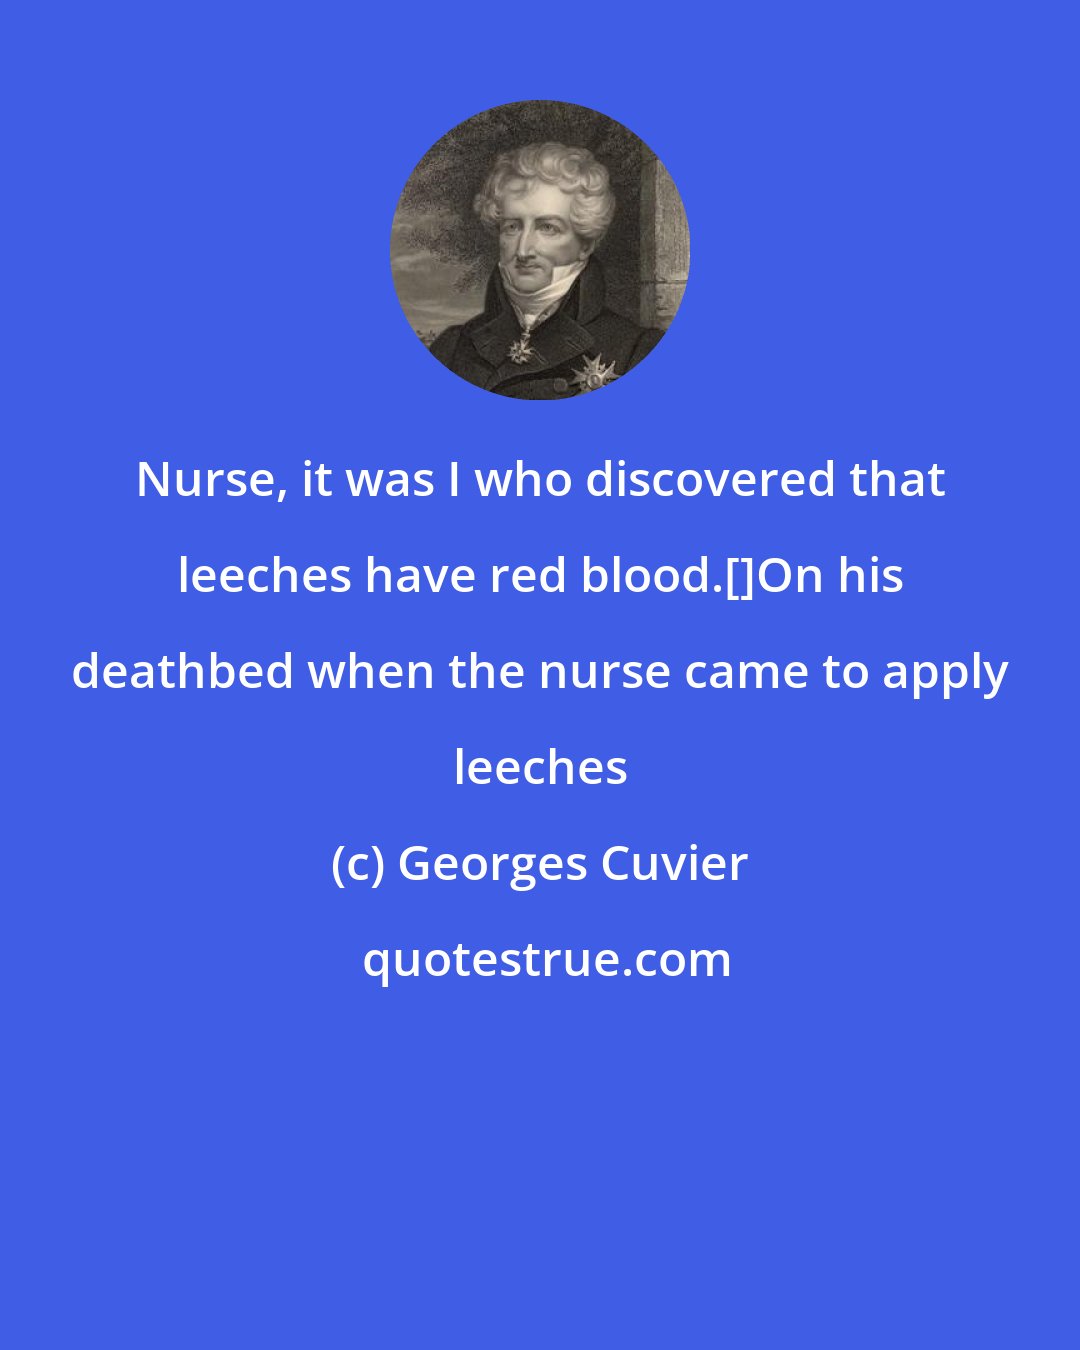 Georges Cuvier: Nurse, it was I who discovered that leeches have red blood.[]On his deathbed when the nurse came to apply leeches